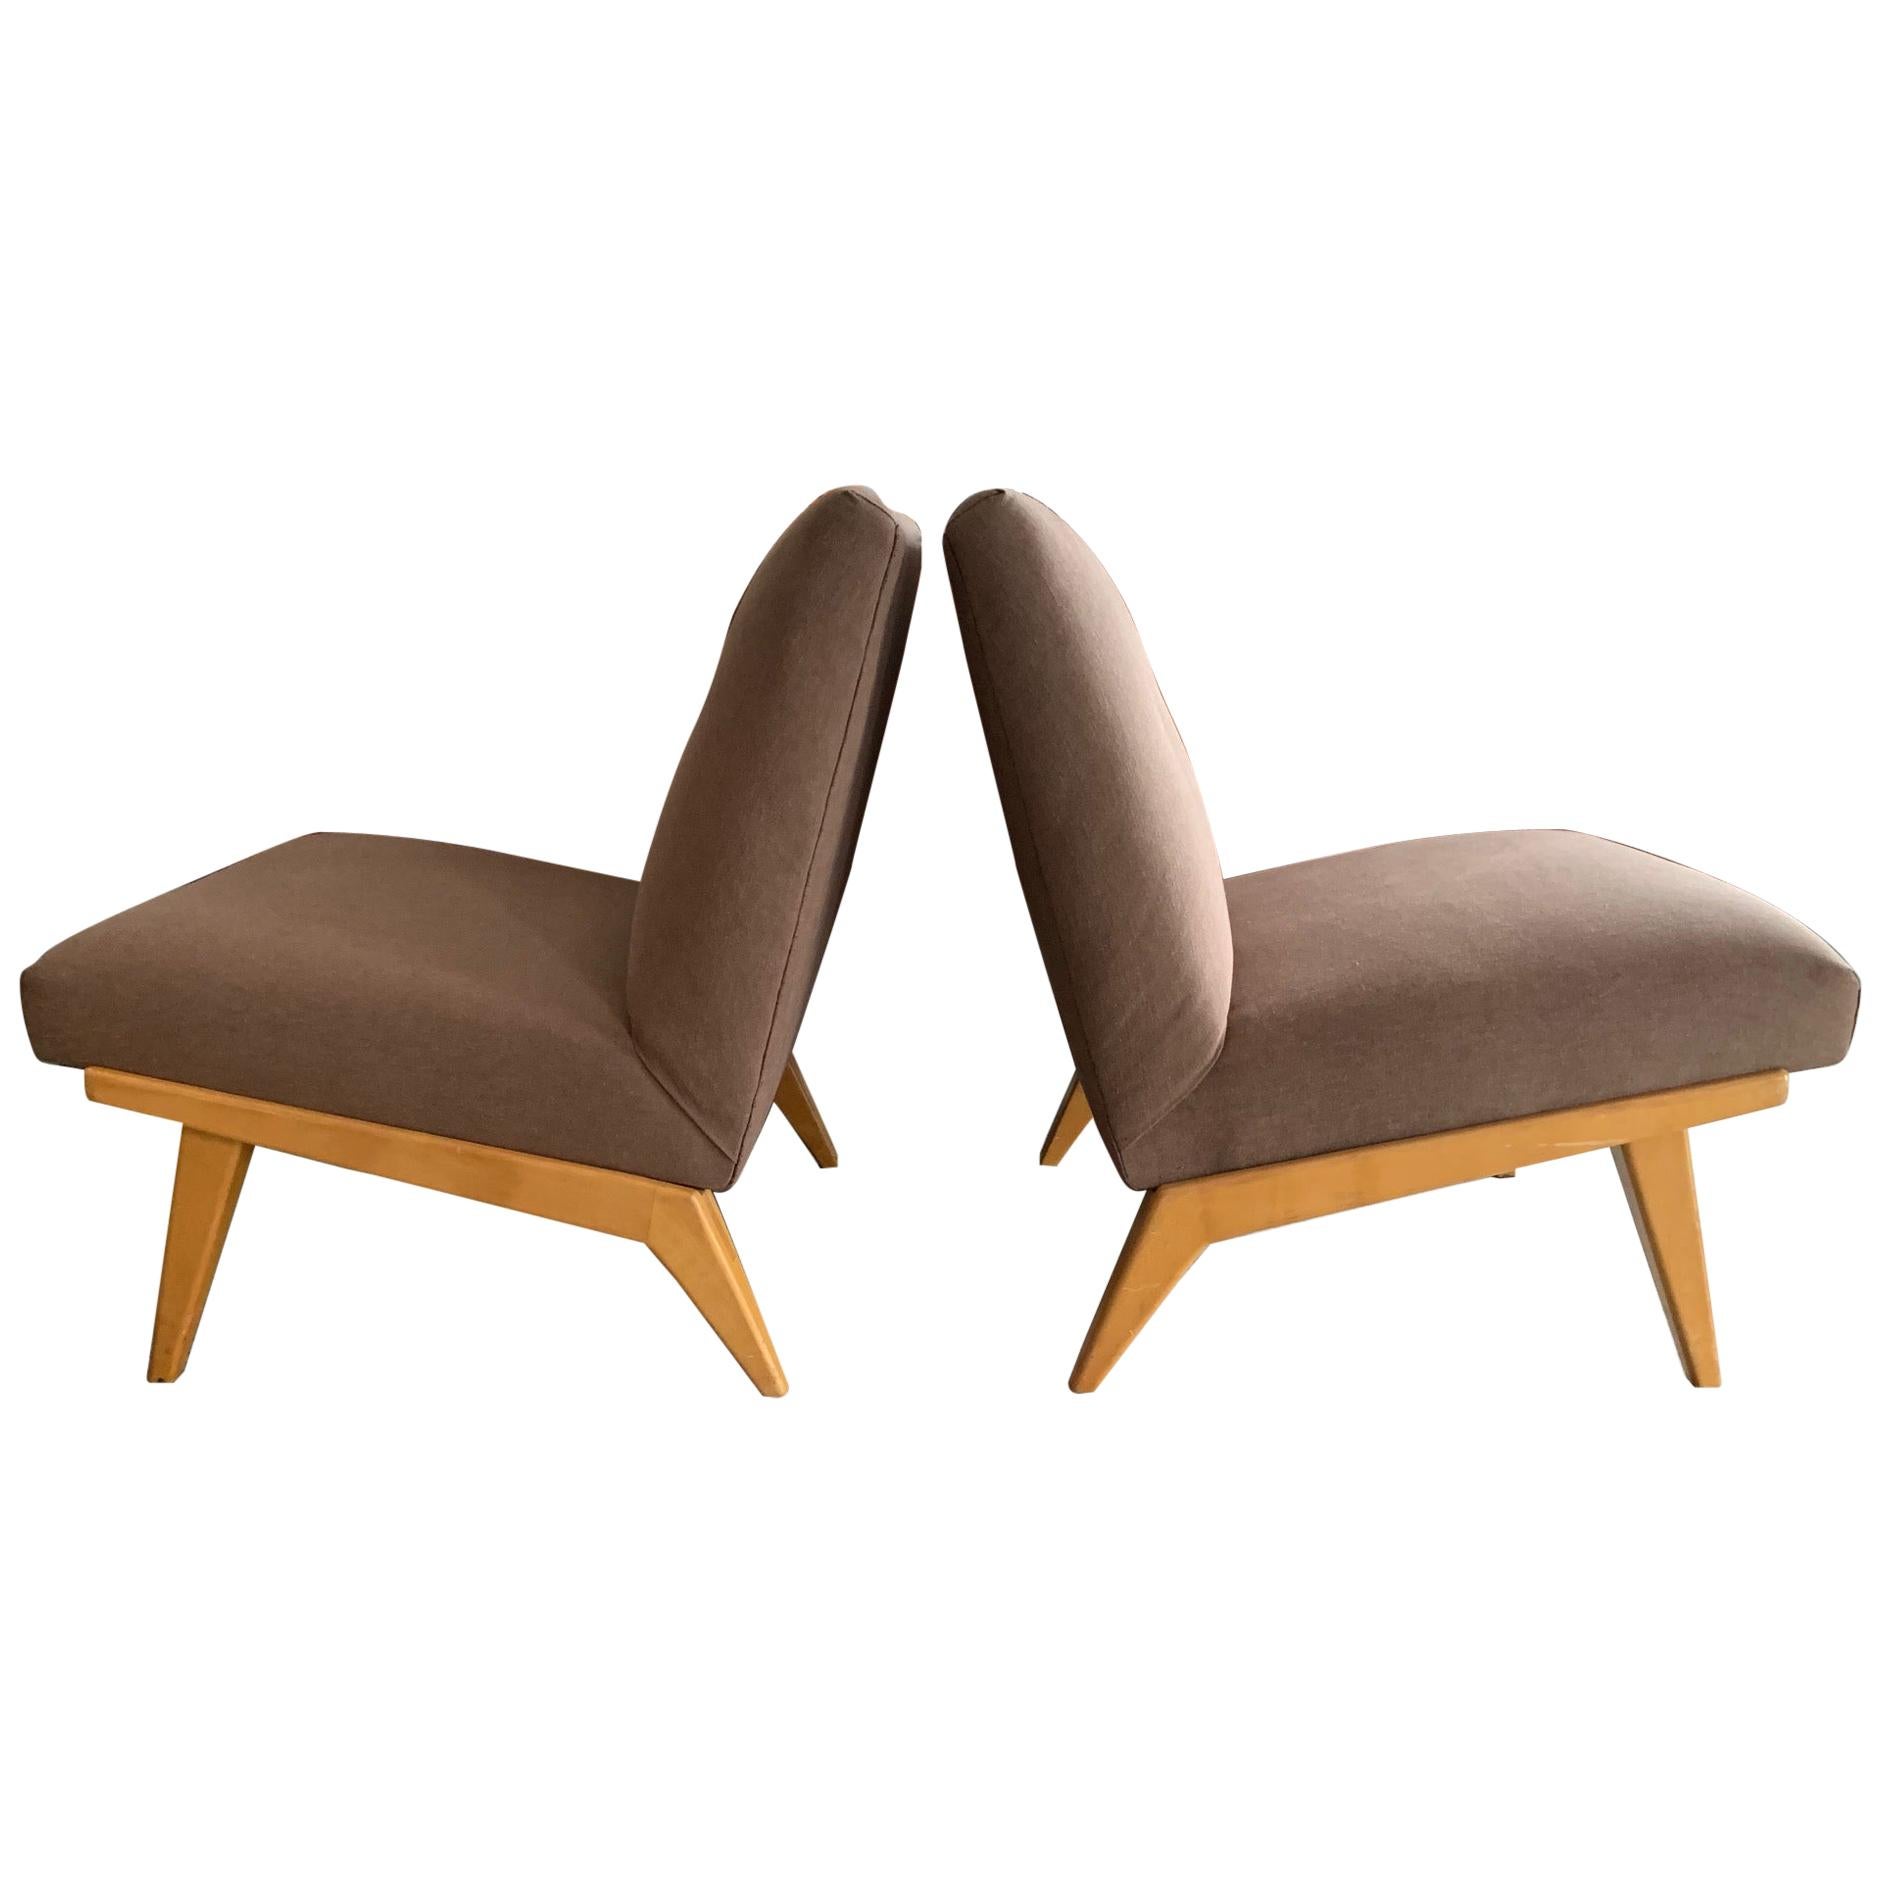 Jens Risom for Knoll Early Slipper Chairs